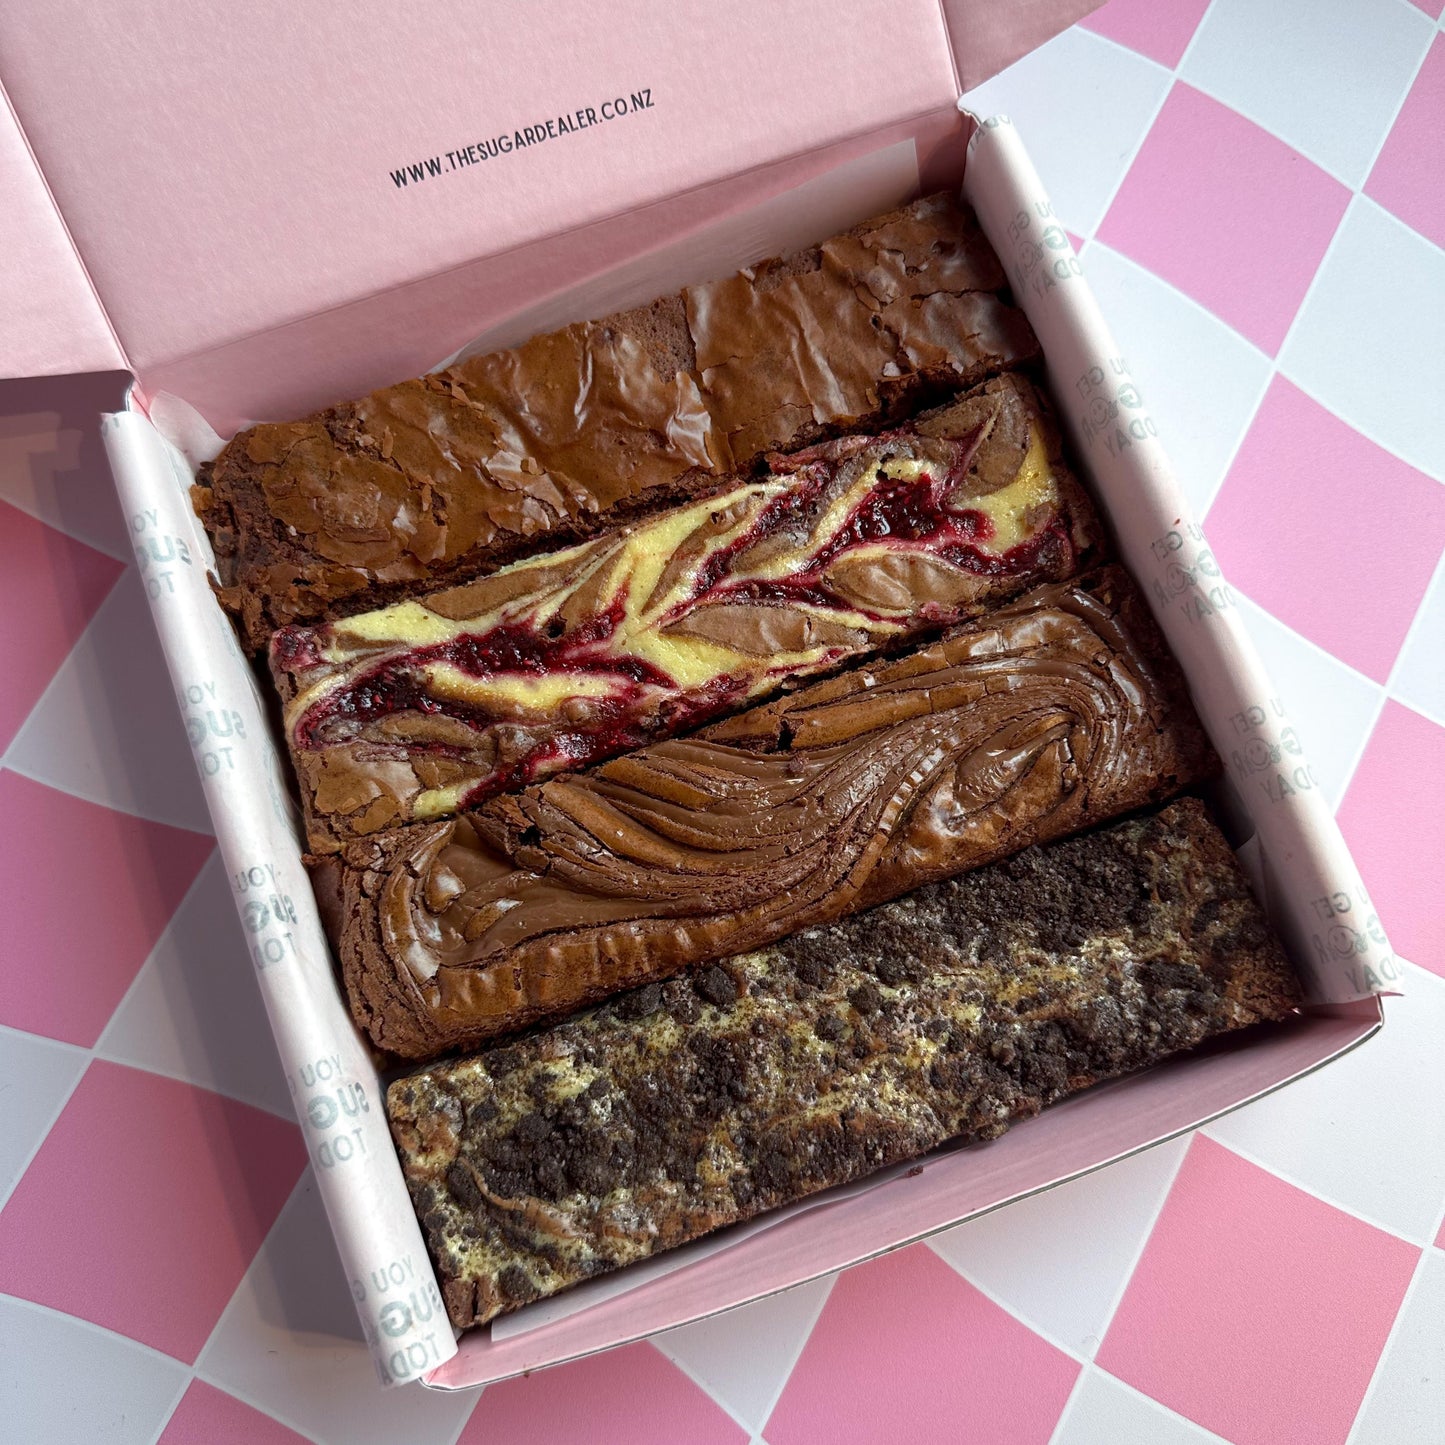 the classic brownie comes with four different brownie flavours - there's chocolate, oreo cheesecake, raspberry cheesecake and nutella!